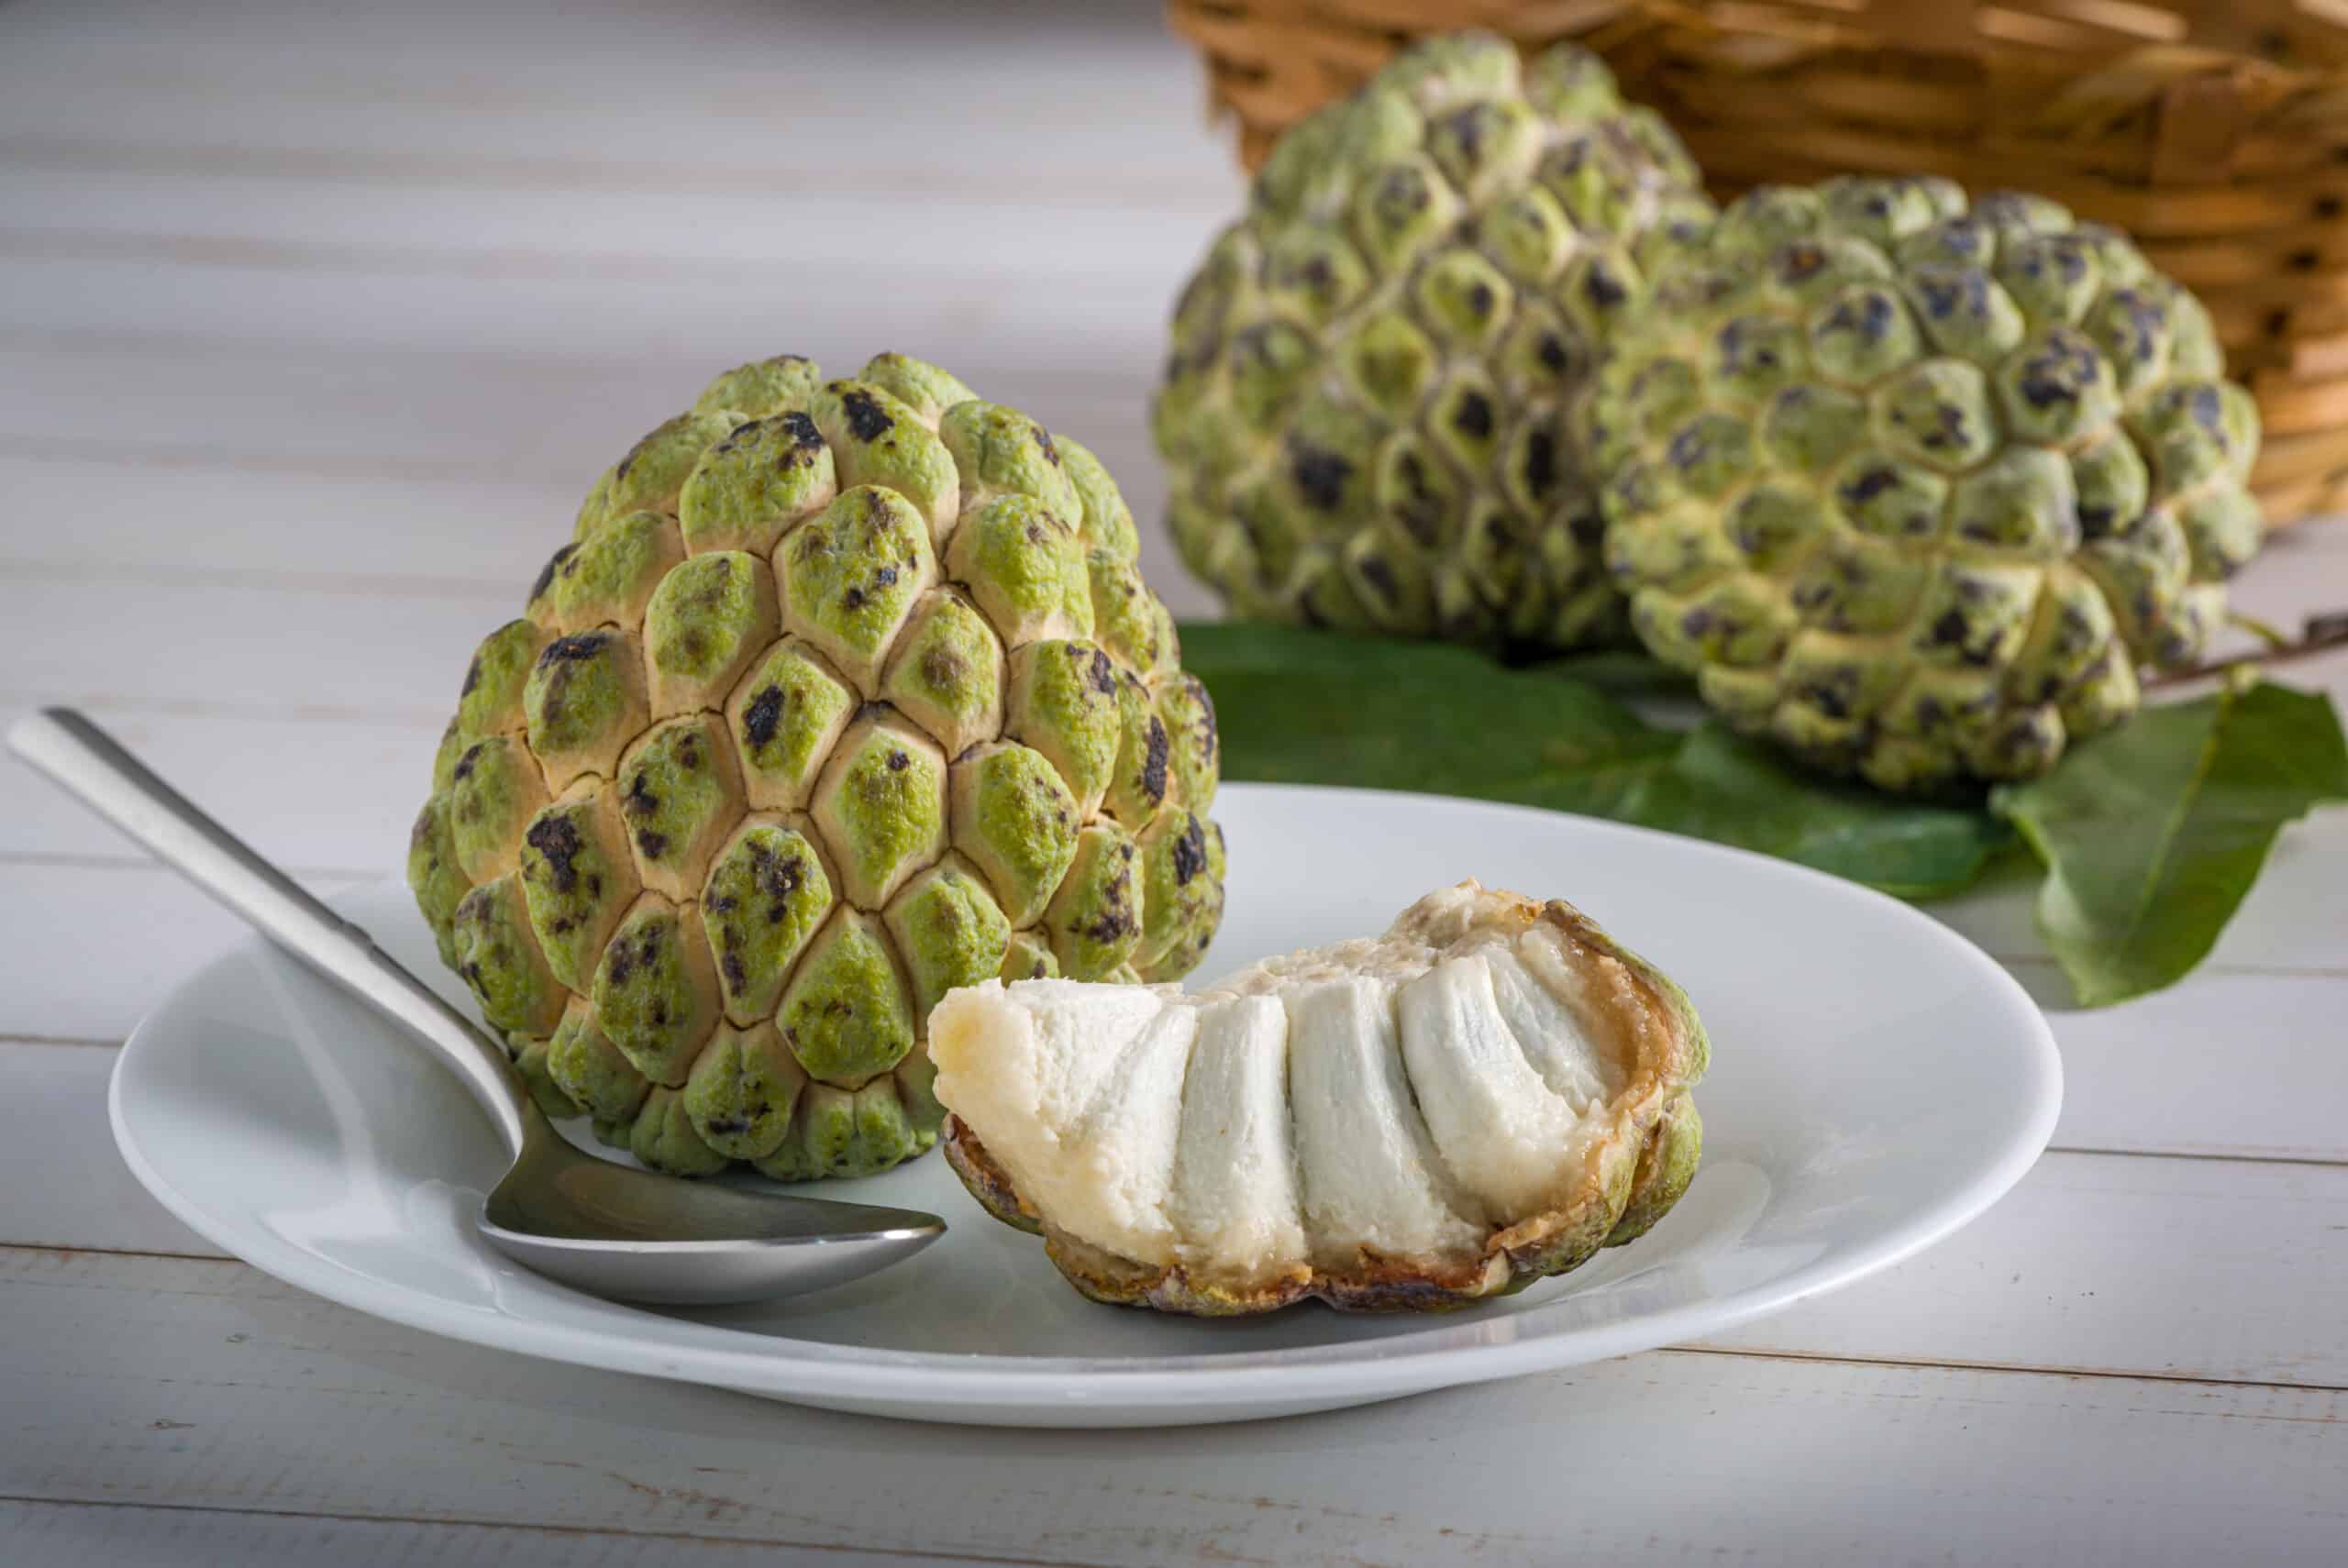 Do Custard Apples Enhance The Well being Of Males?